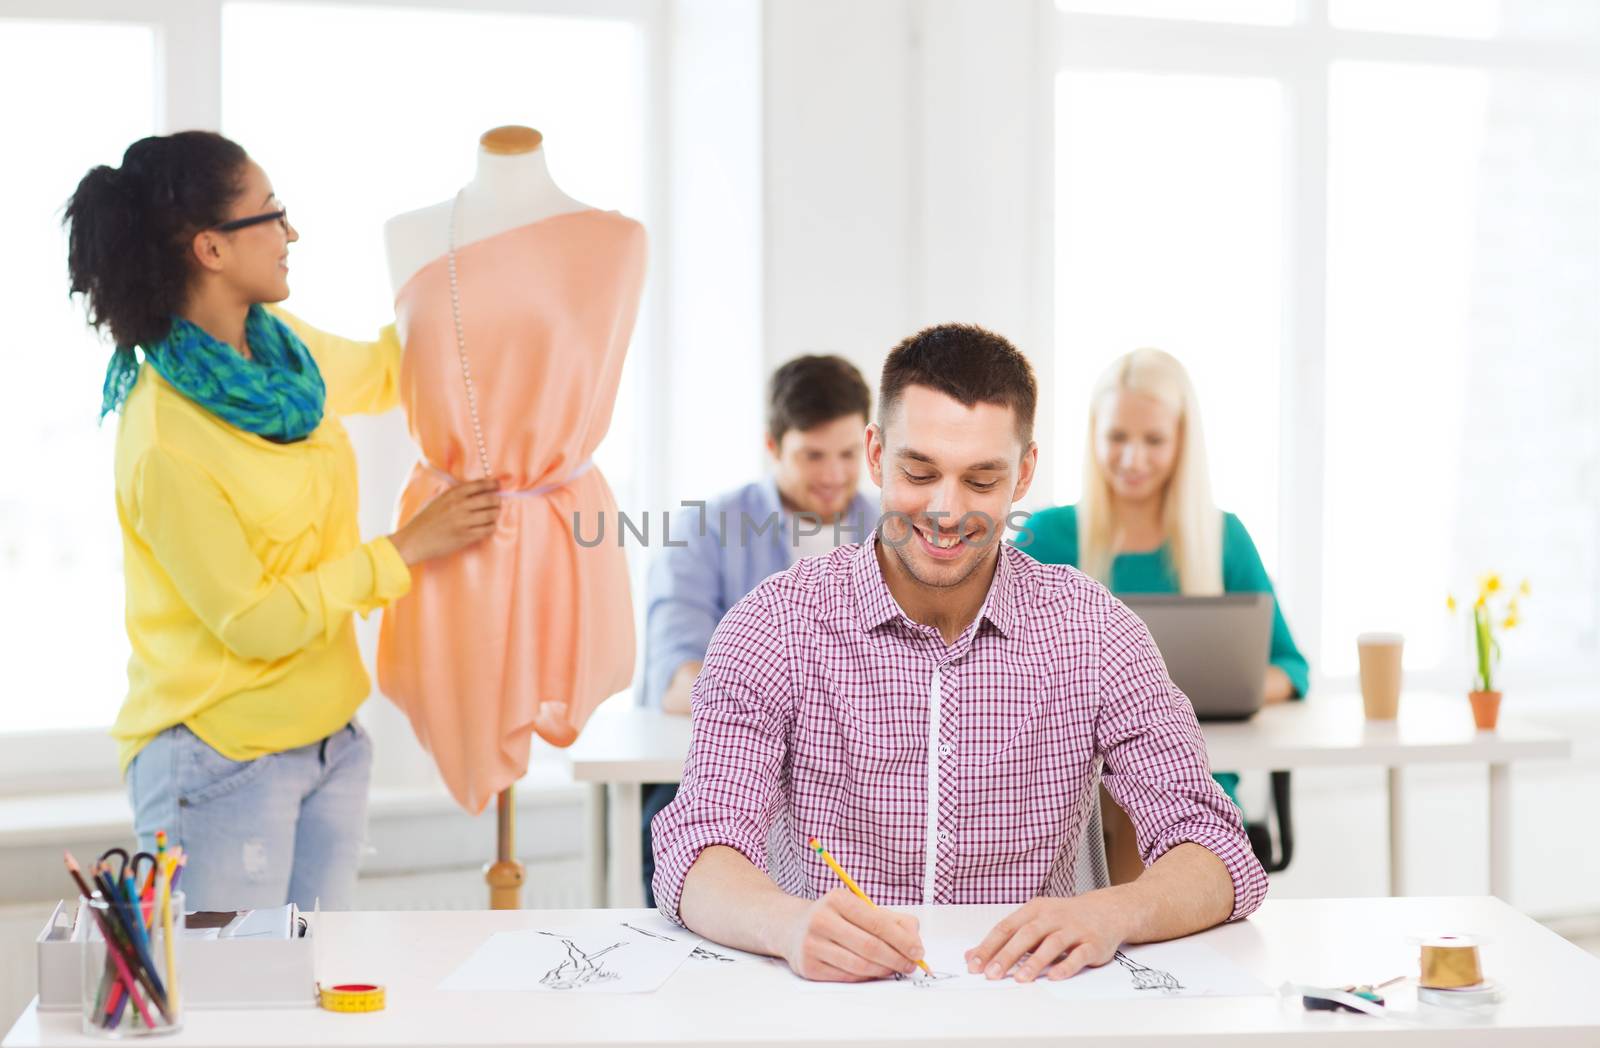 startup, education, fashion and office concept - smiling male drawing sketches and female adjusting dress on mannequin in office